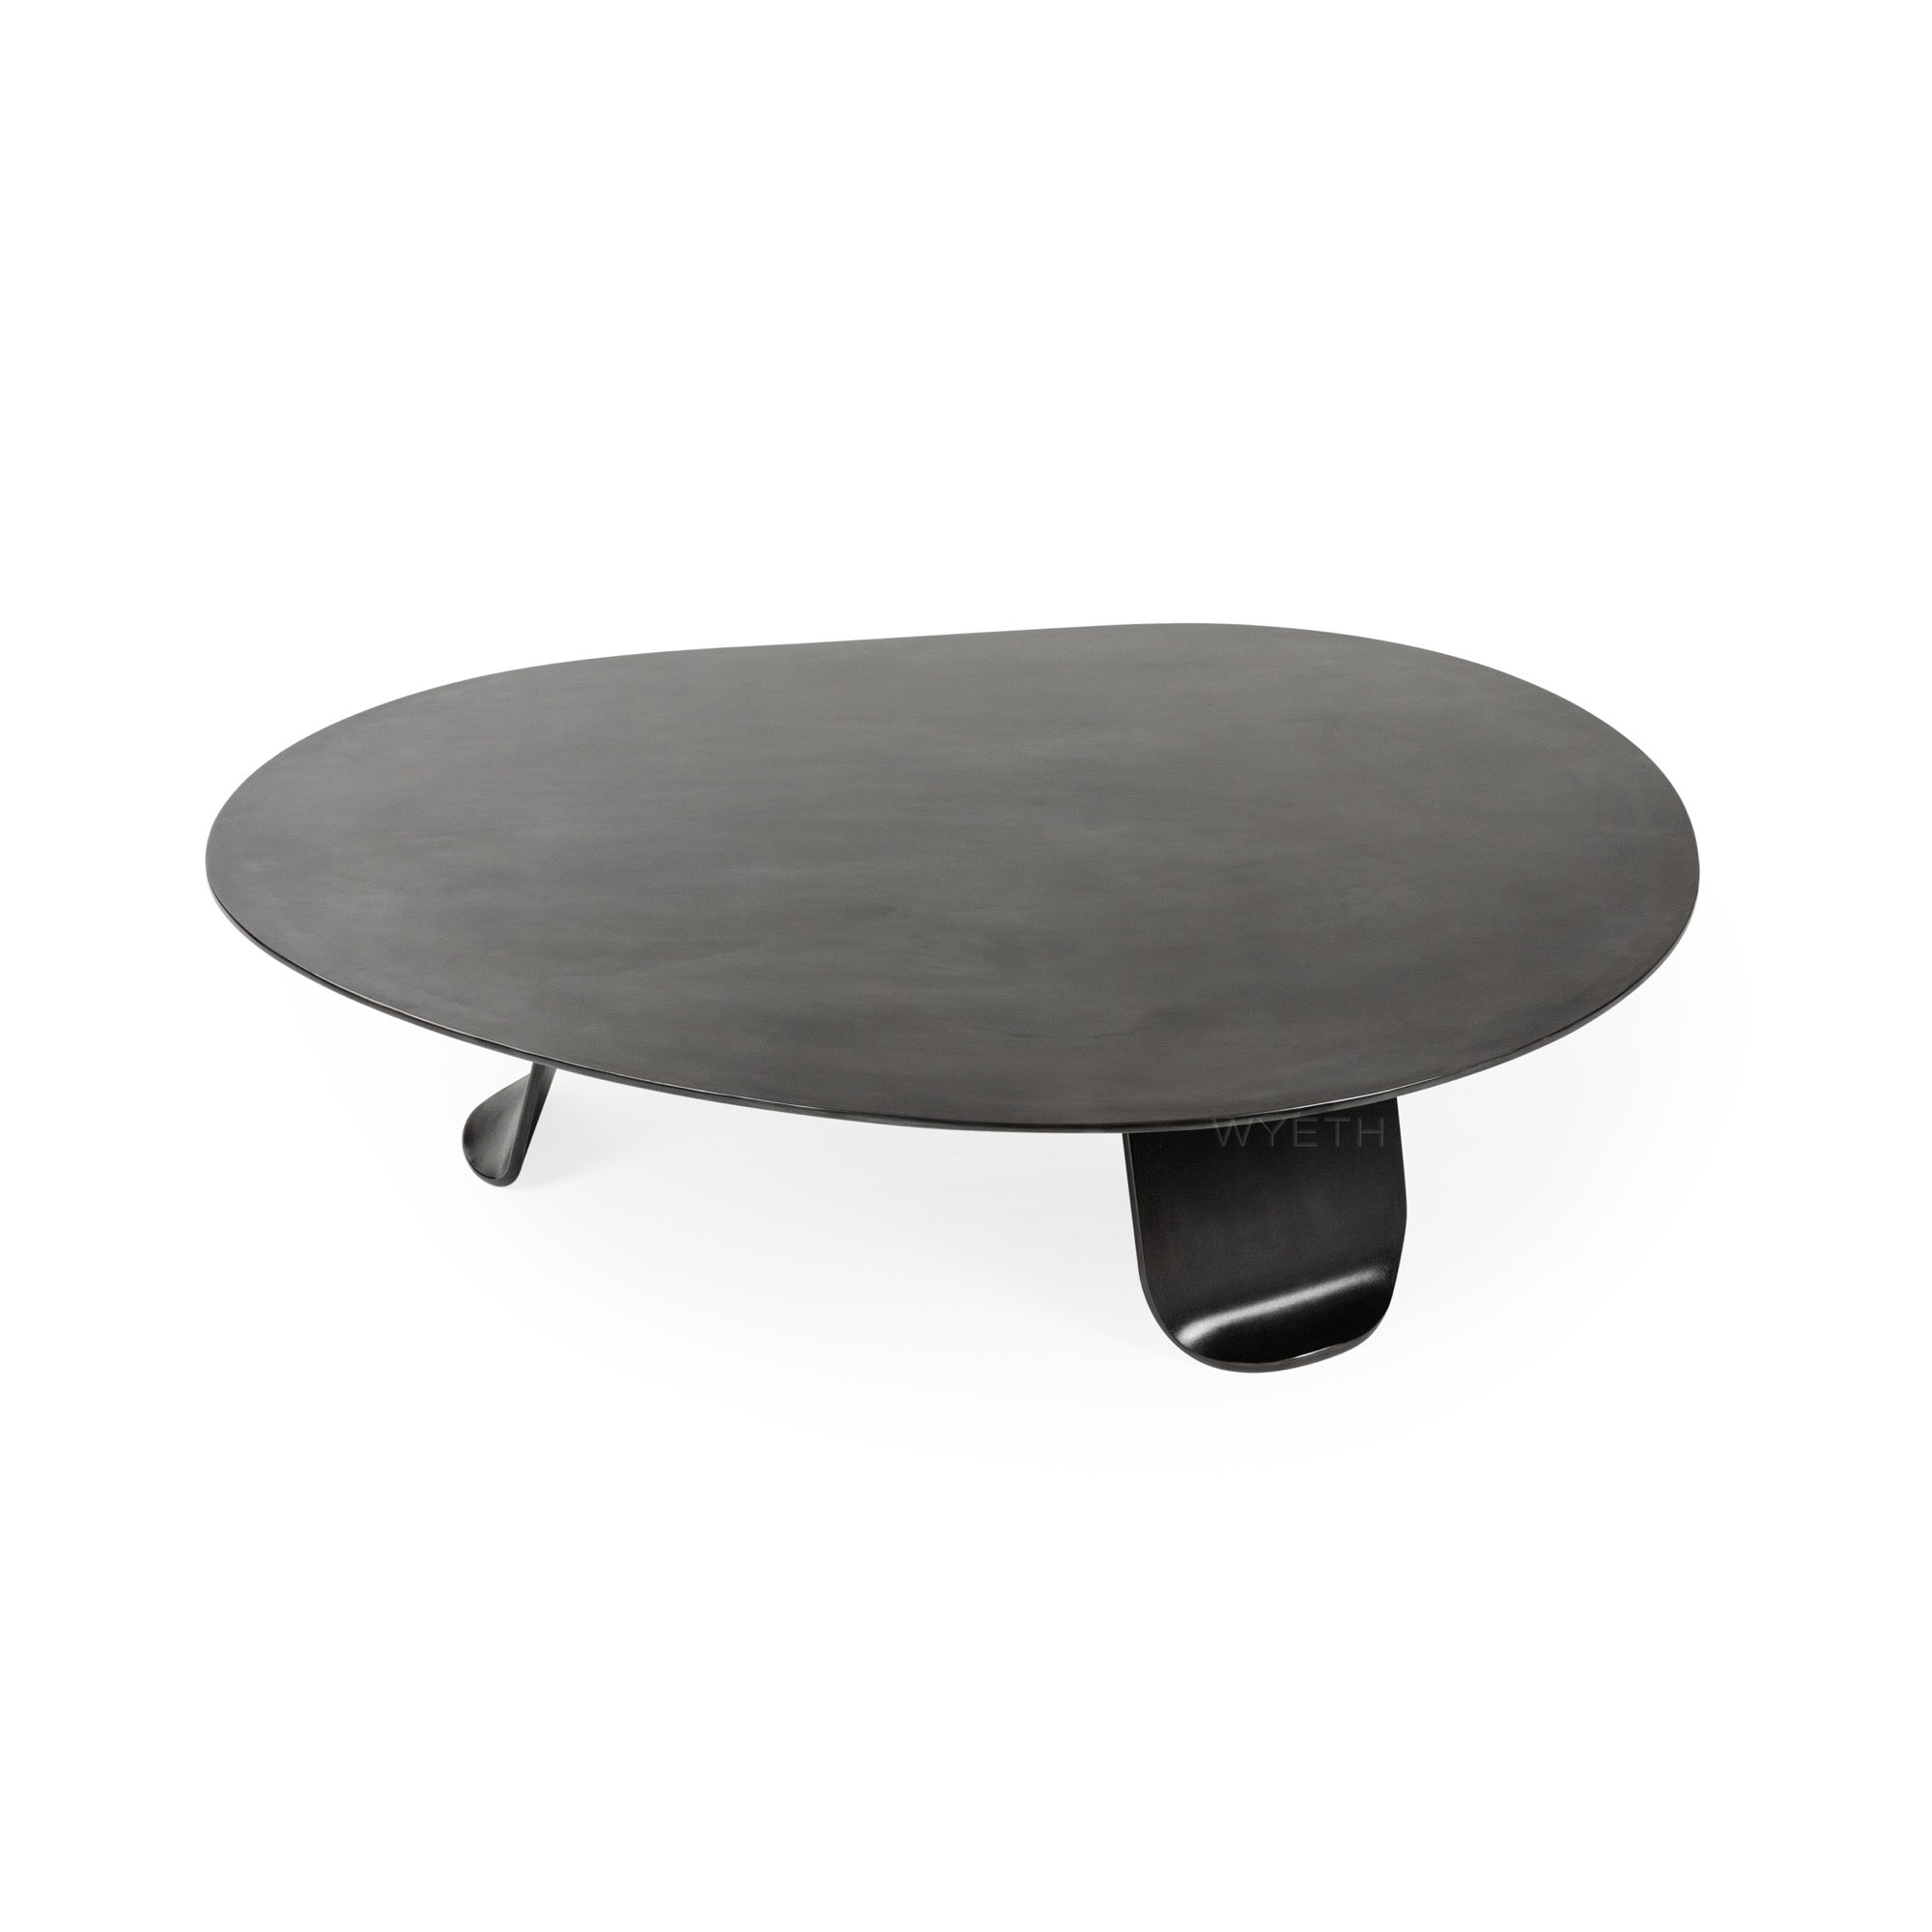 Chrysalis No. 2 Low Table in Blackened Steel by WYETH, Made to Order